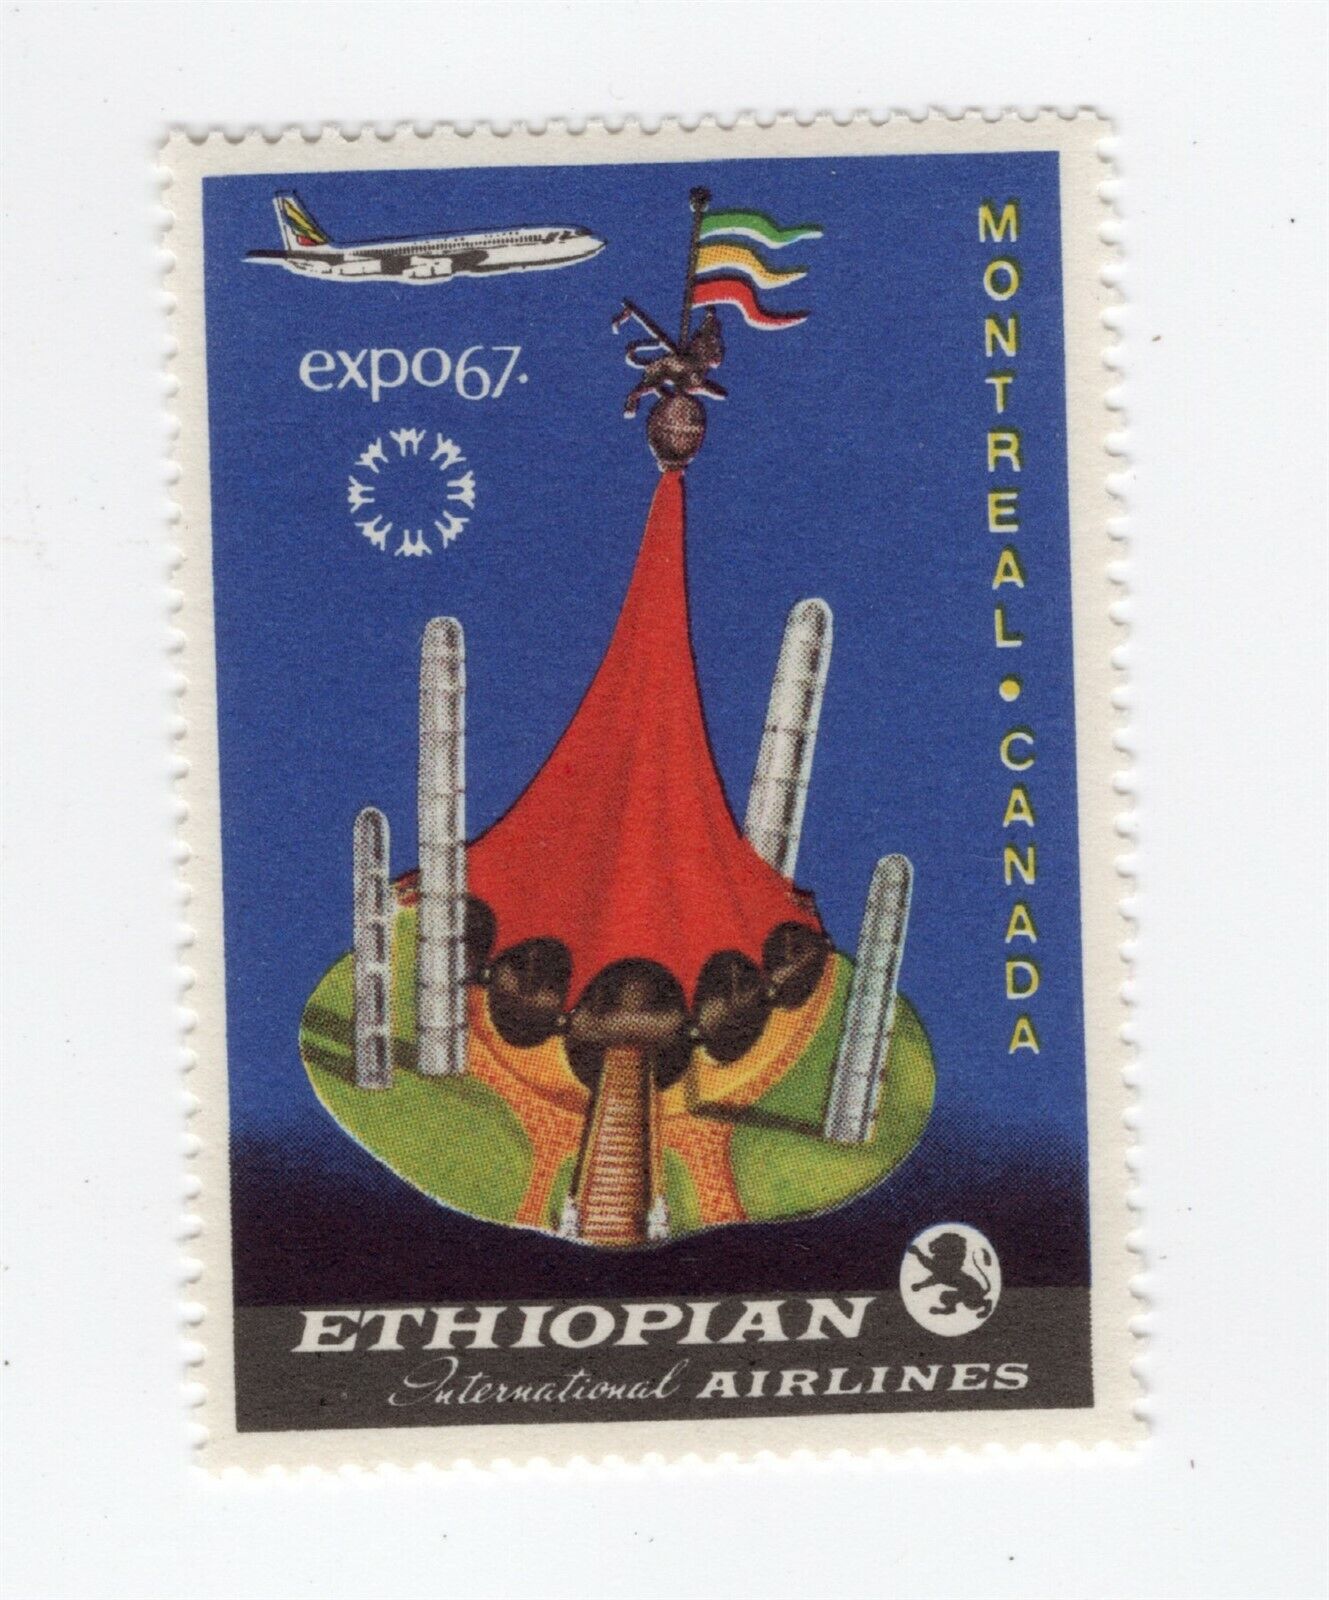 ETHIOPIA AIRLINES EXPO '67 MONTREAL CANADA POSTER STAMP